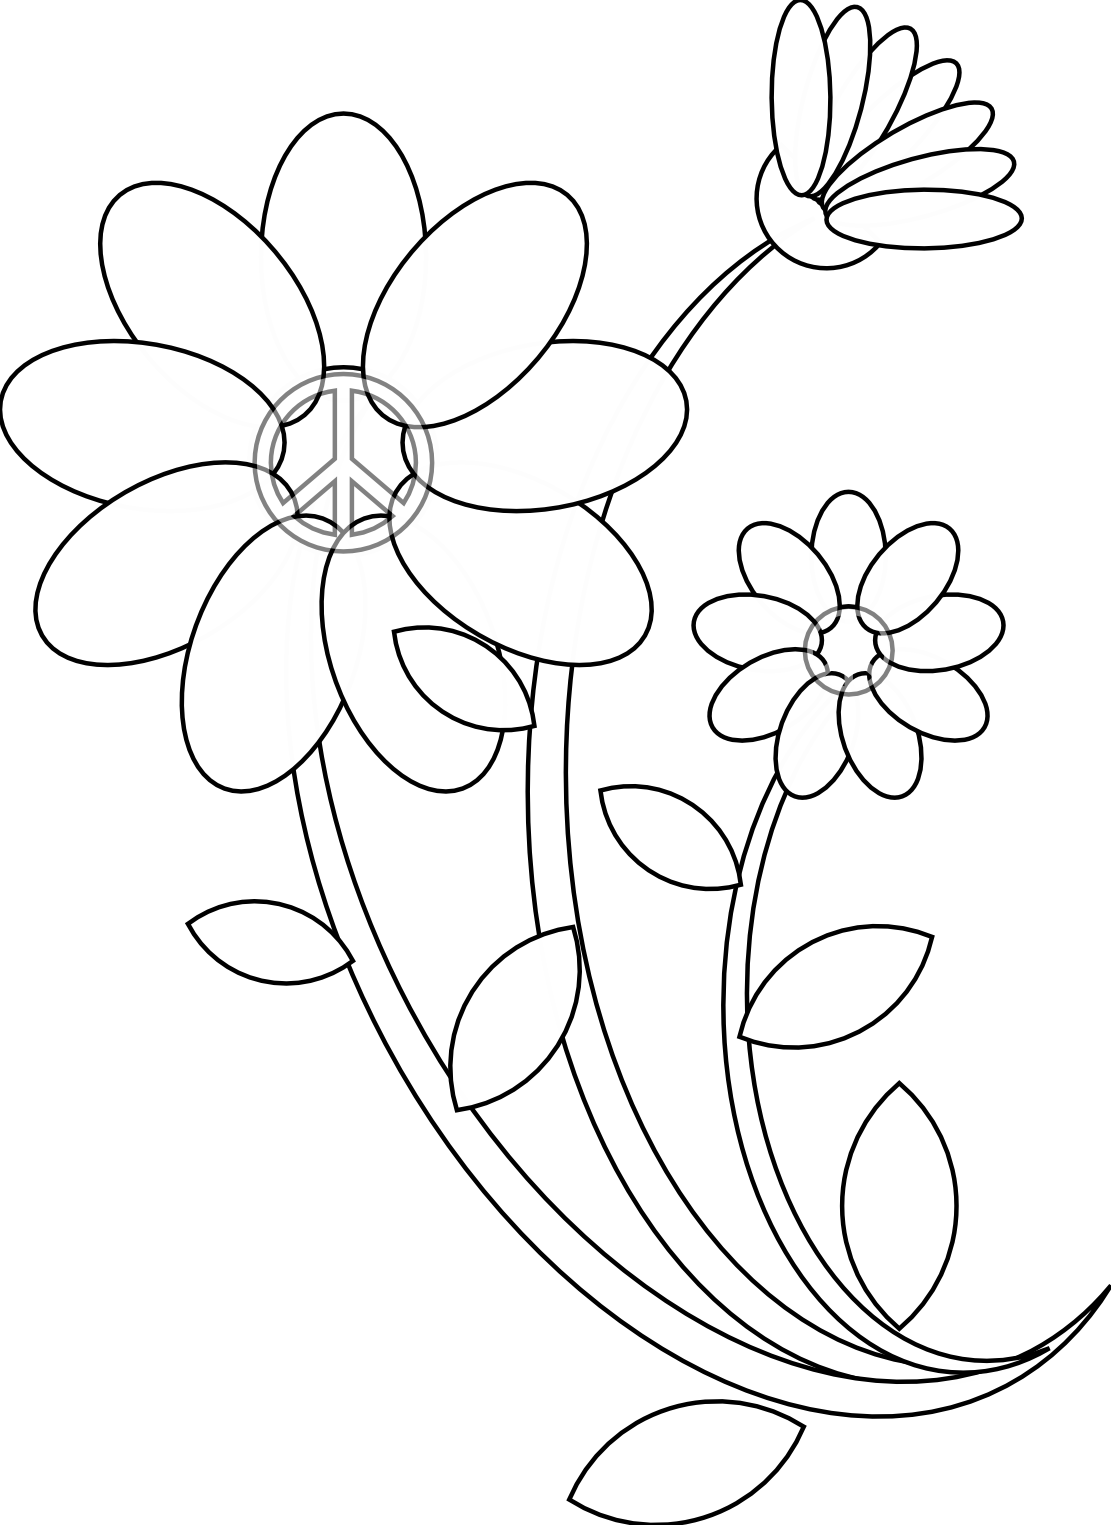 Images Of Line Drawing Of Flowers - Flower Images Line Drawings (1111x1525)